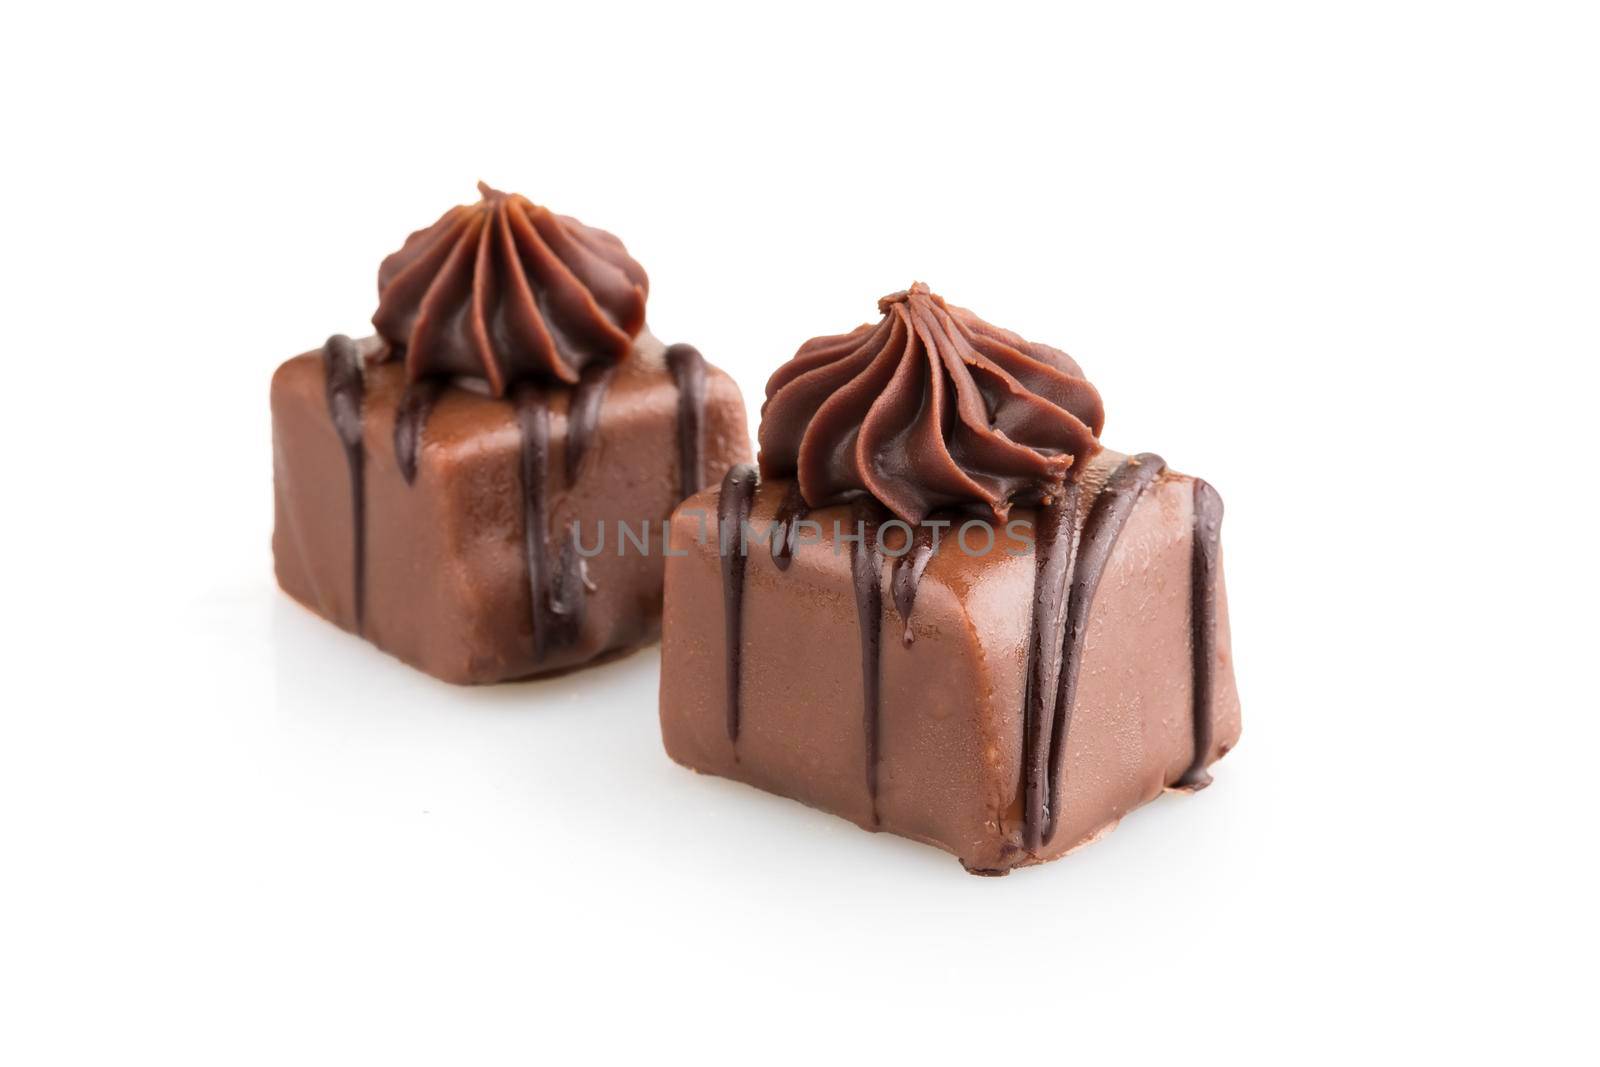 Gourmet chocolates with milk and dark chocolate isolated on white with shadow.